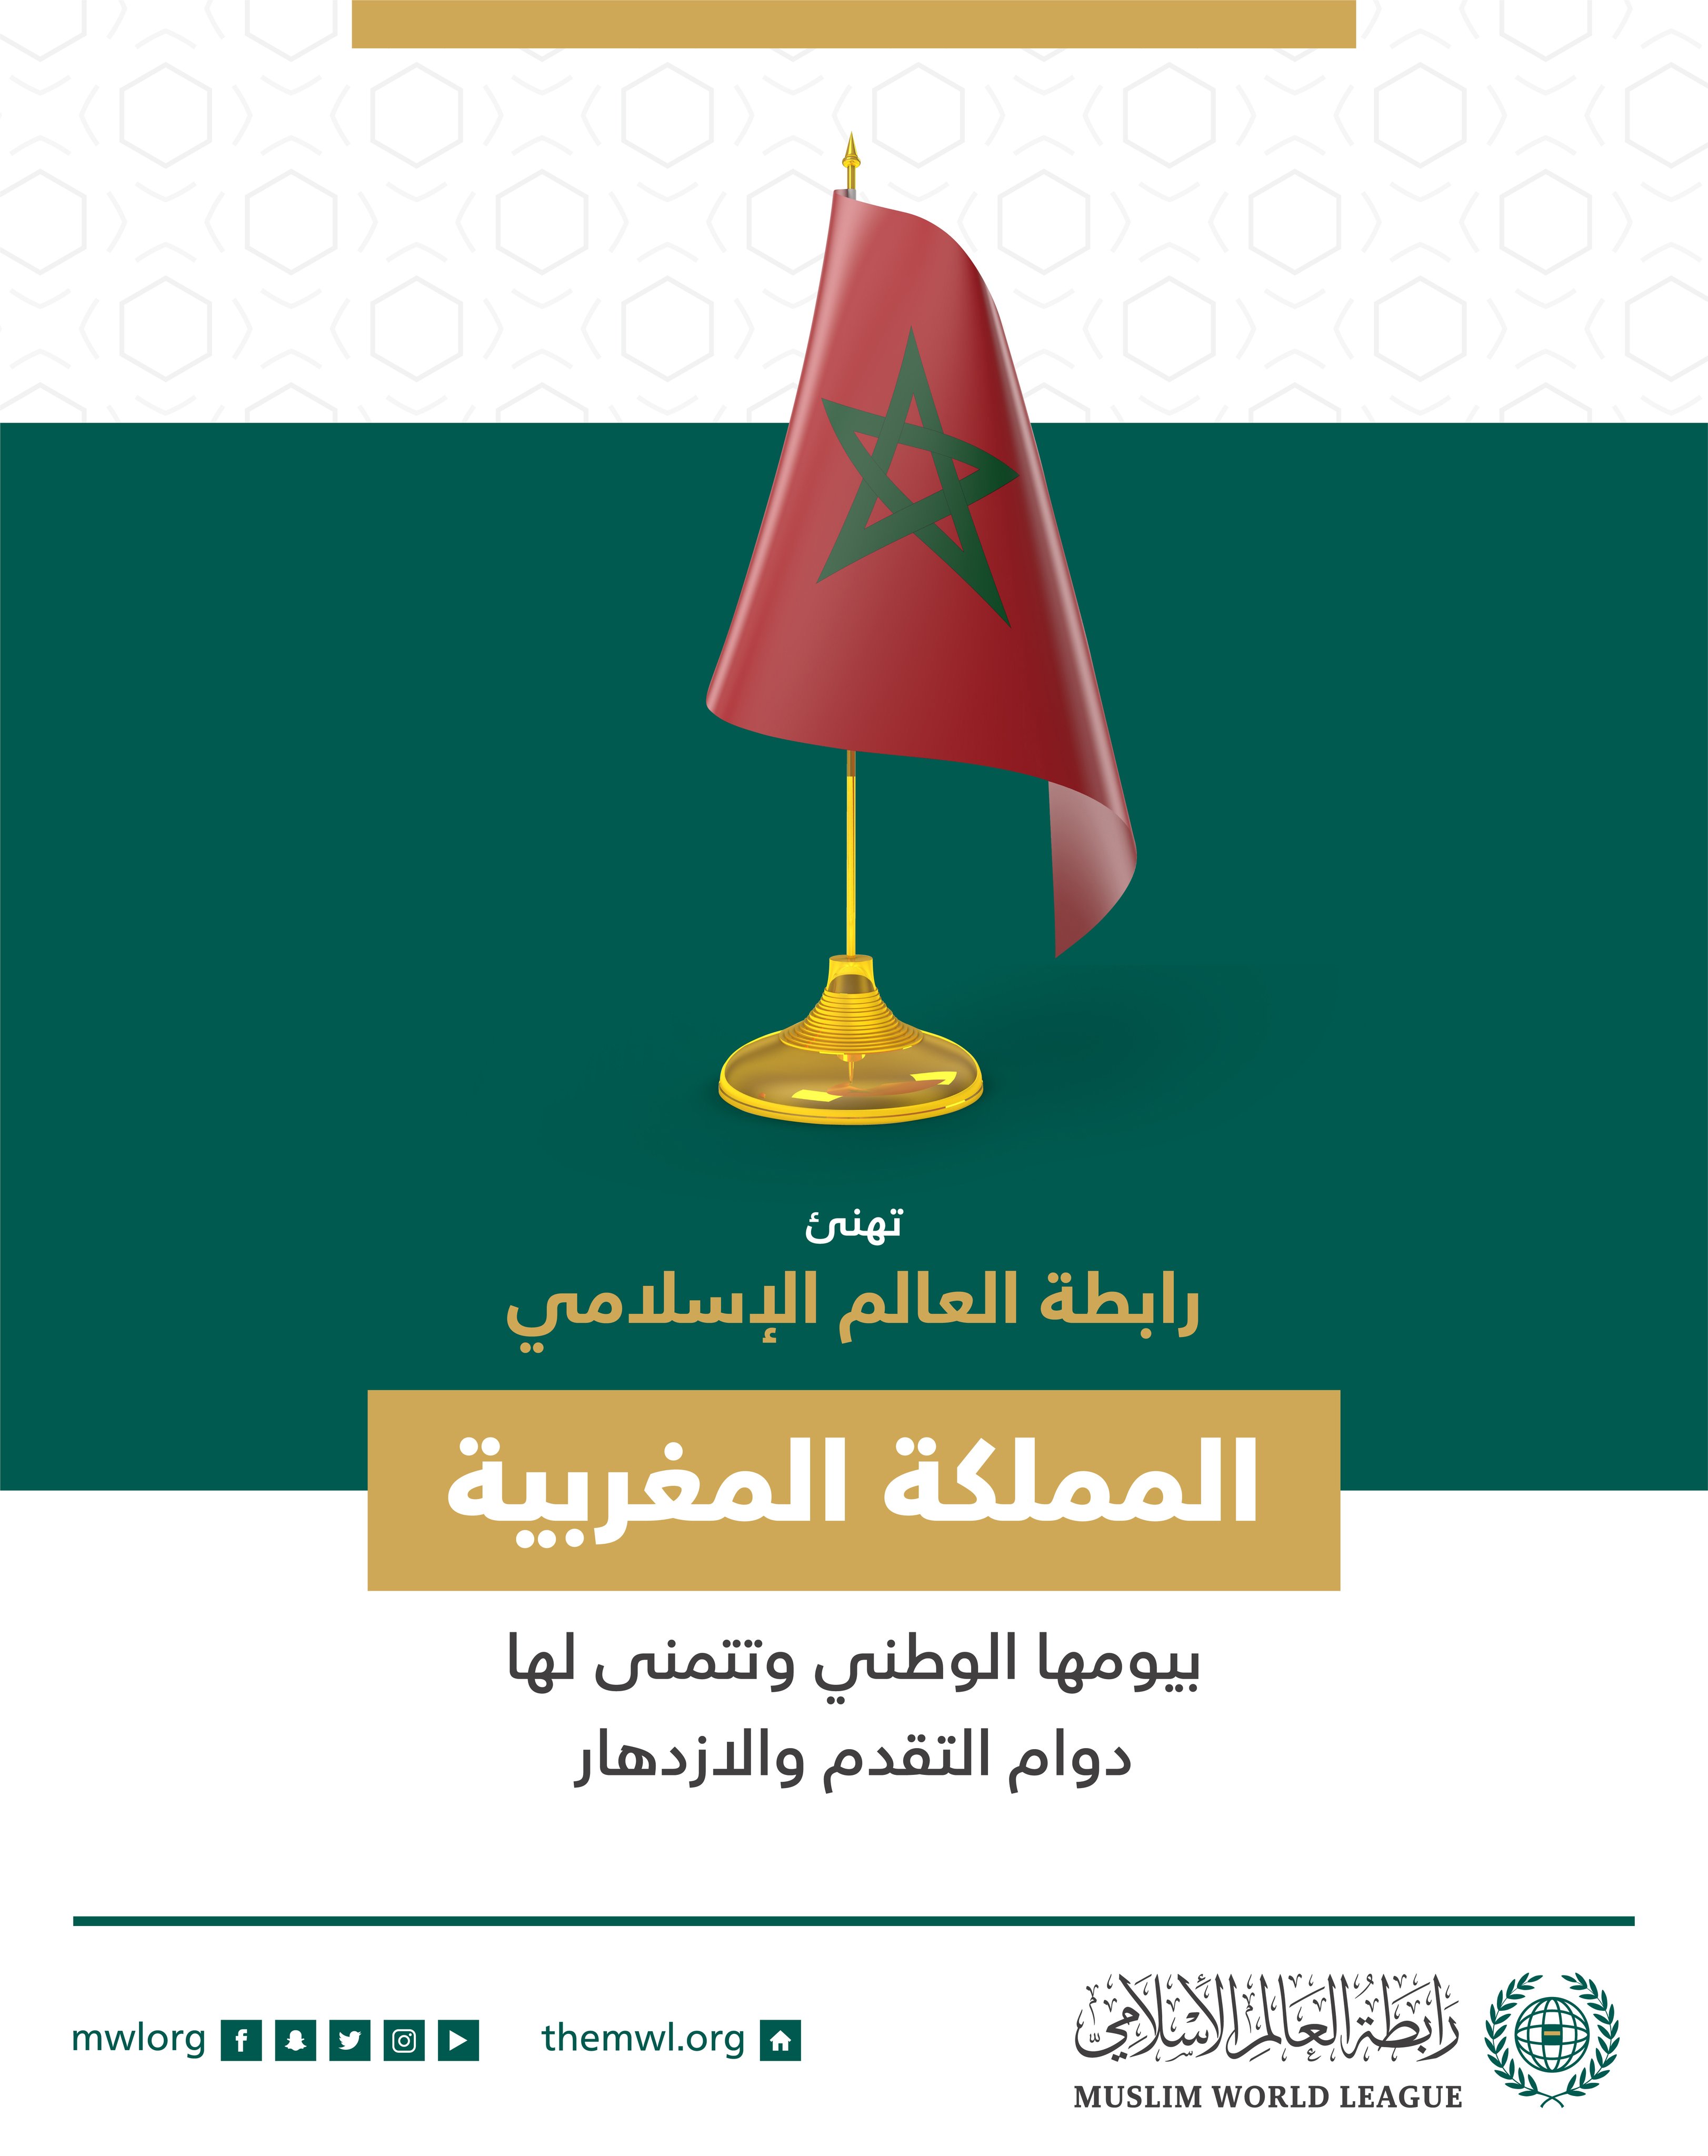 The Muslim World League congratulates the Kingdom of Morocco on their National Independence Day!